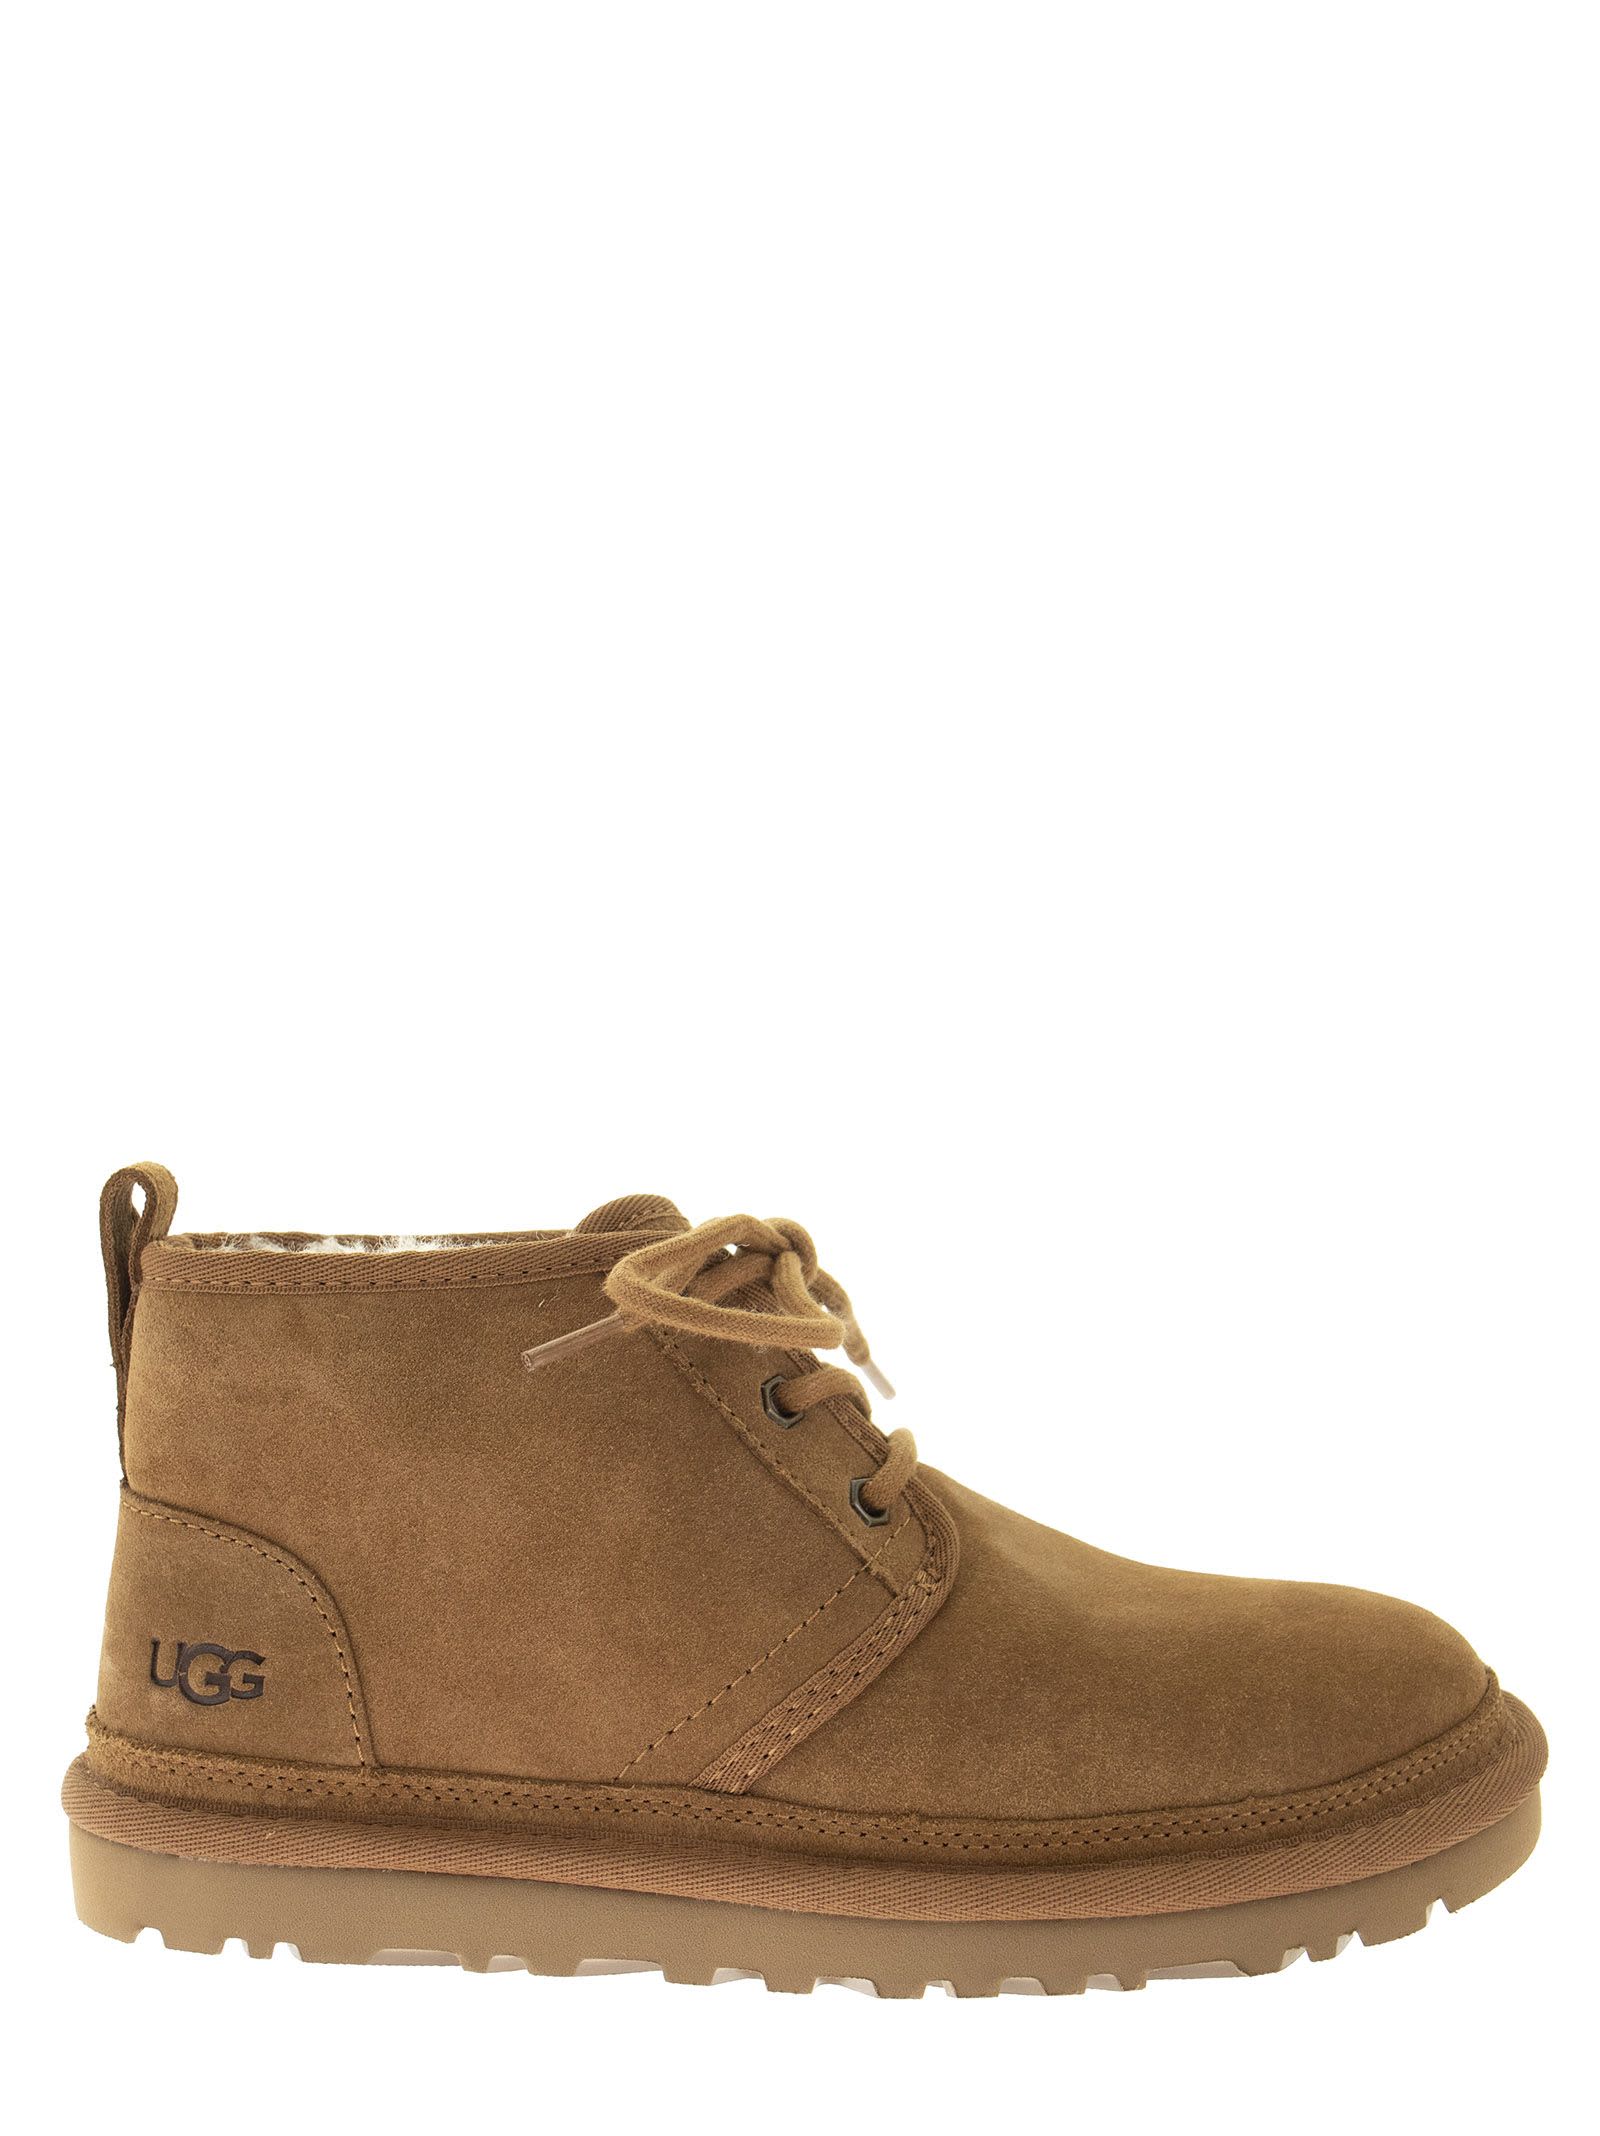 UGG Neumel - Classic Boots